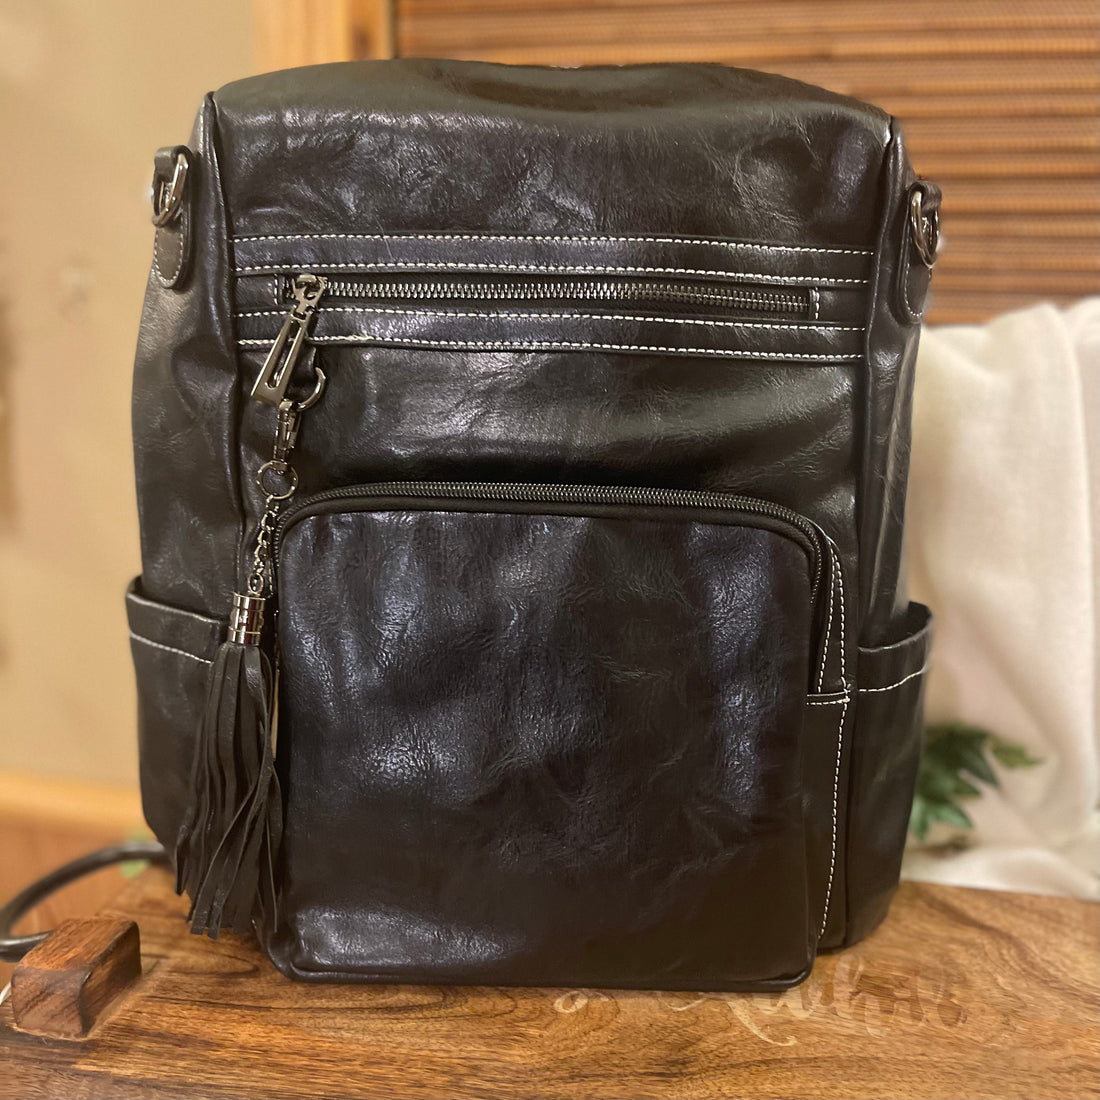 Vegan Leather Backpack Tote Bag With Leather Tassel Zippers and Detachable Strap Plus Bonus Strap